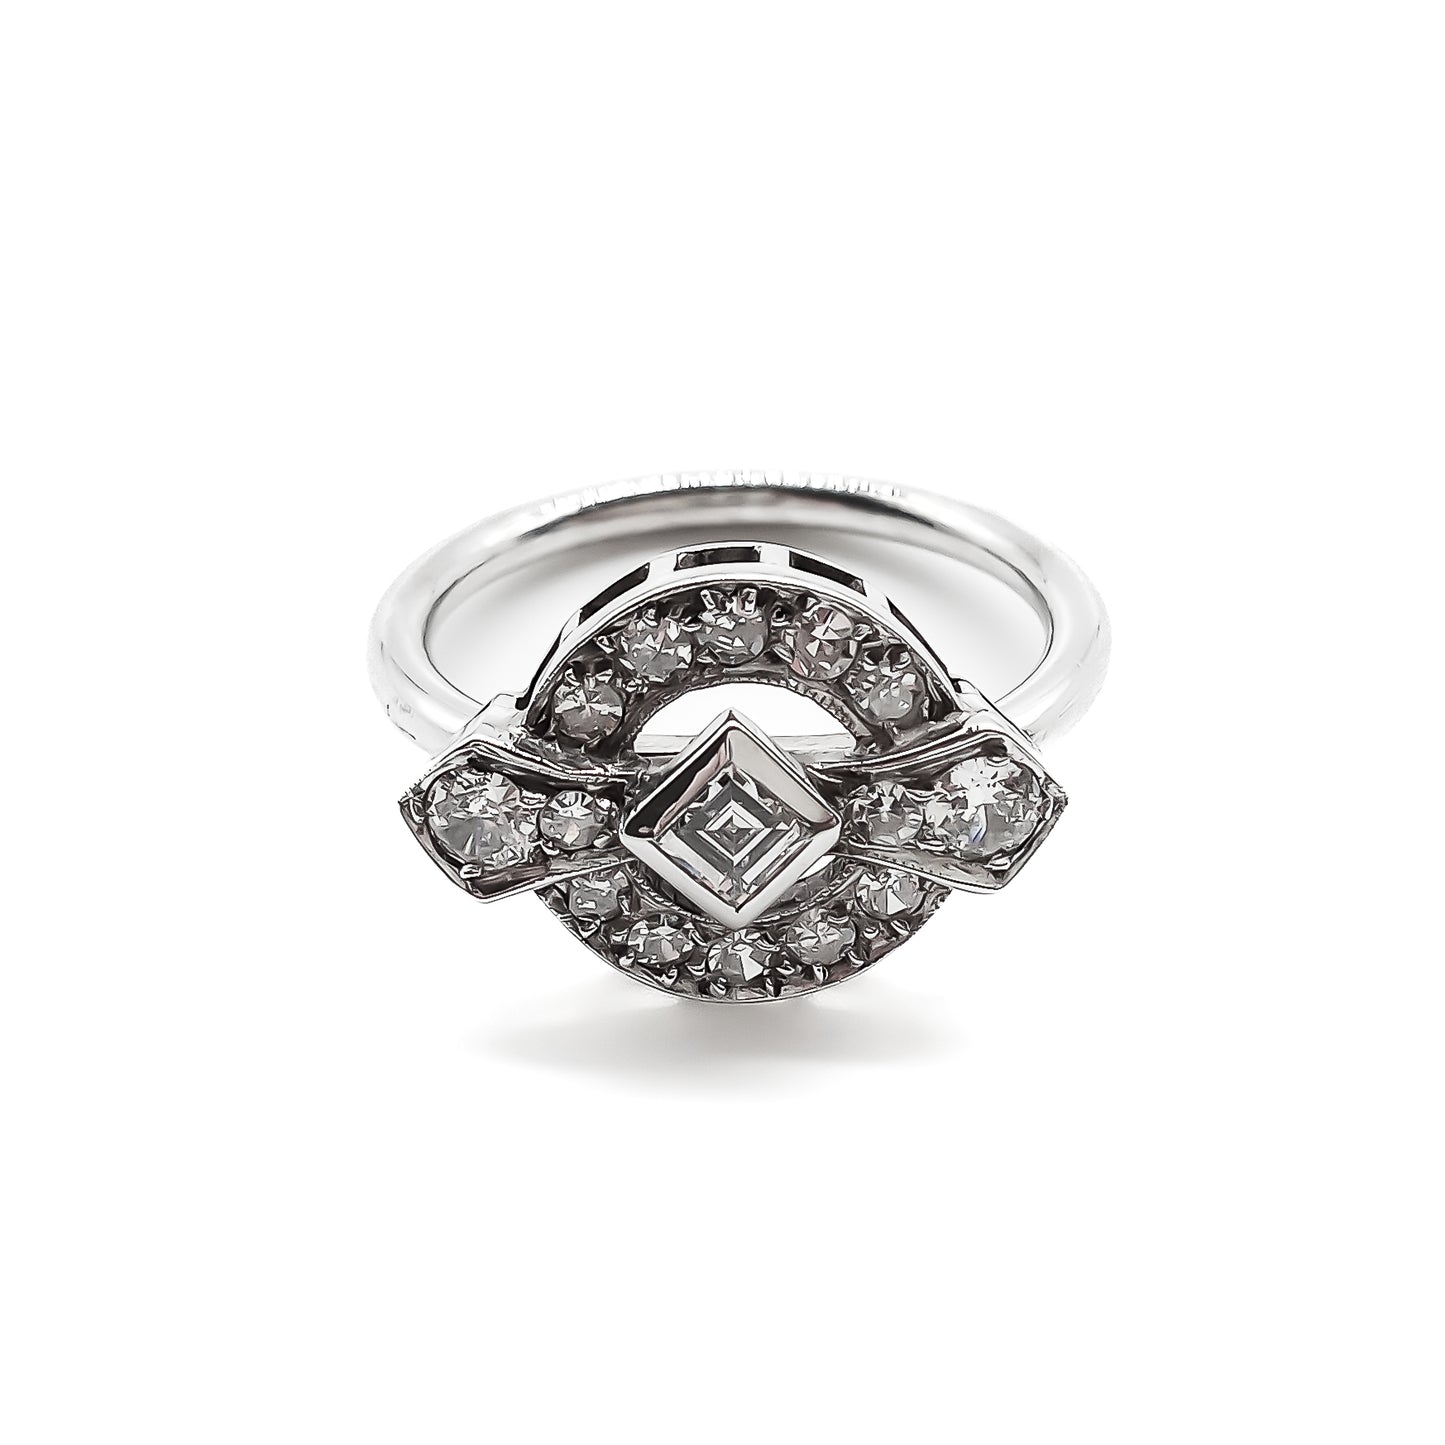 Stunning 18ct white gold Art Deco ring with a princess cut centre diamond and fourteen round cut diamonds.